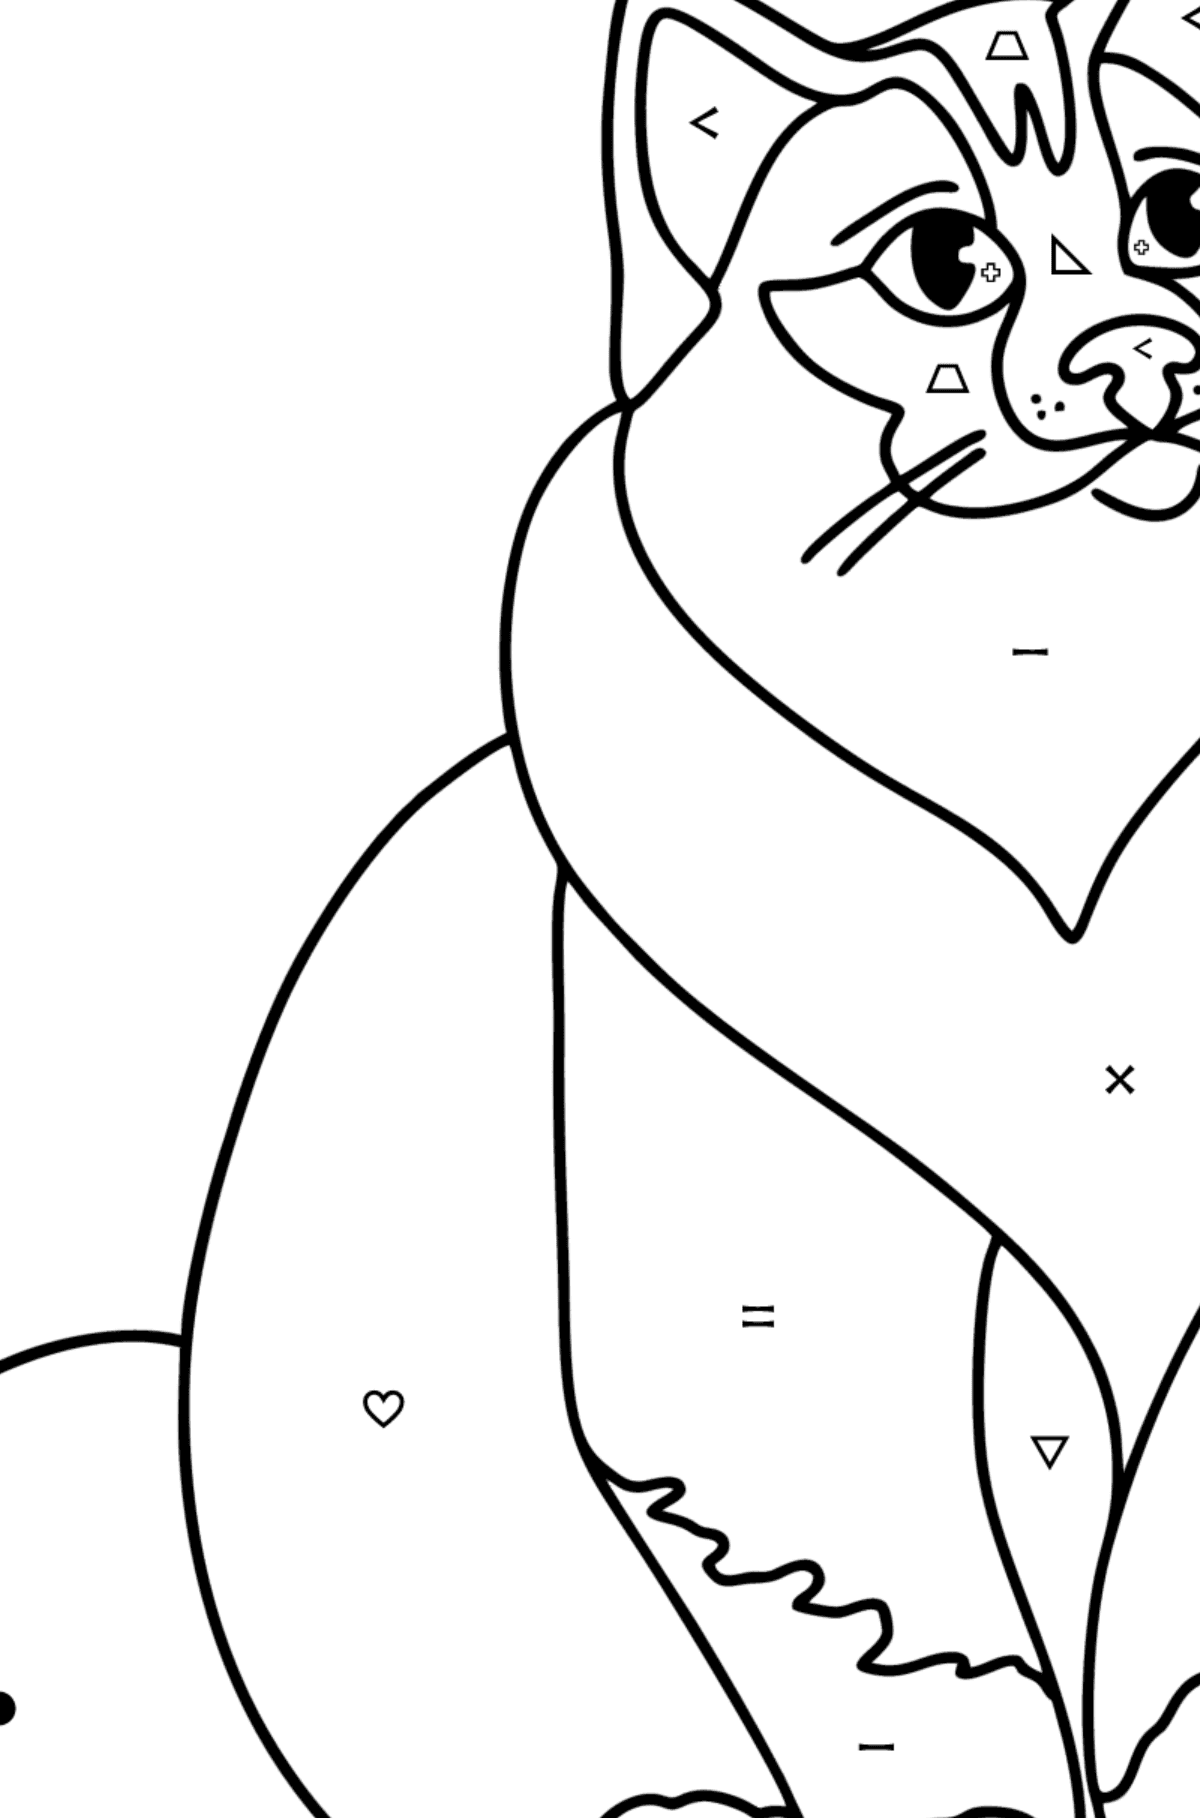 Burmese Cat coloring page - Coloring by Symbols and Geometric Shapes for Kids